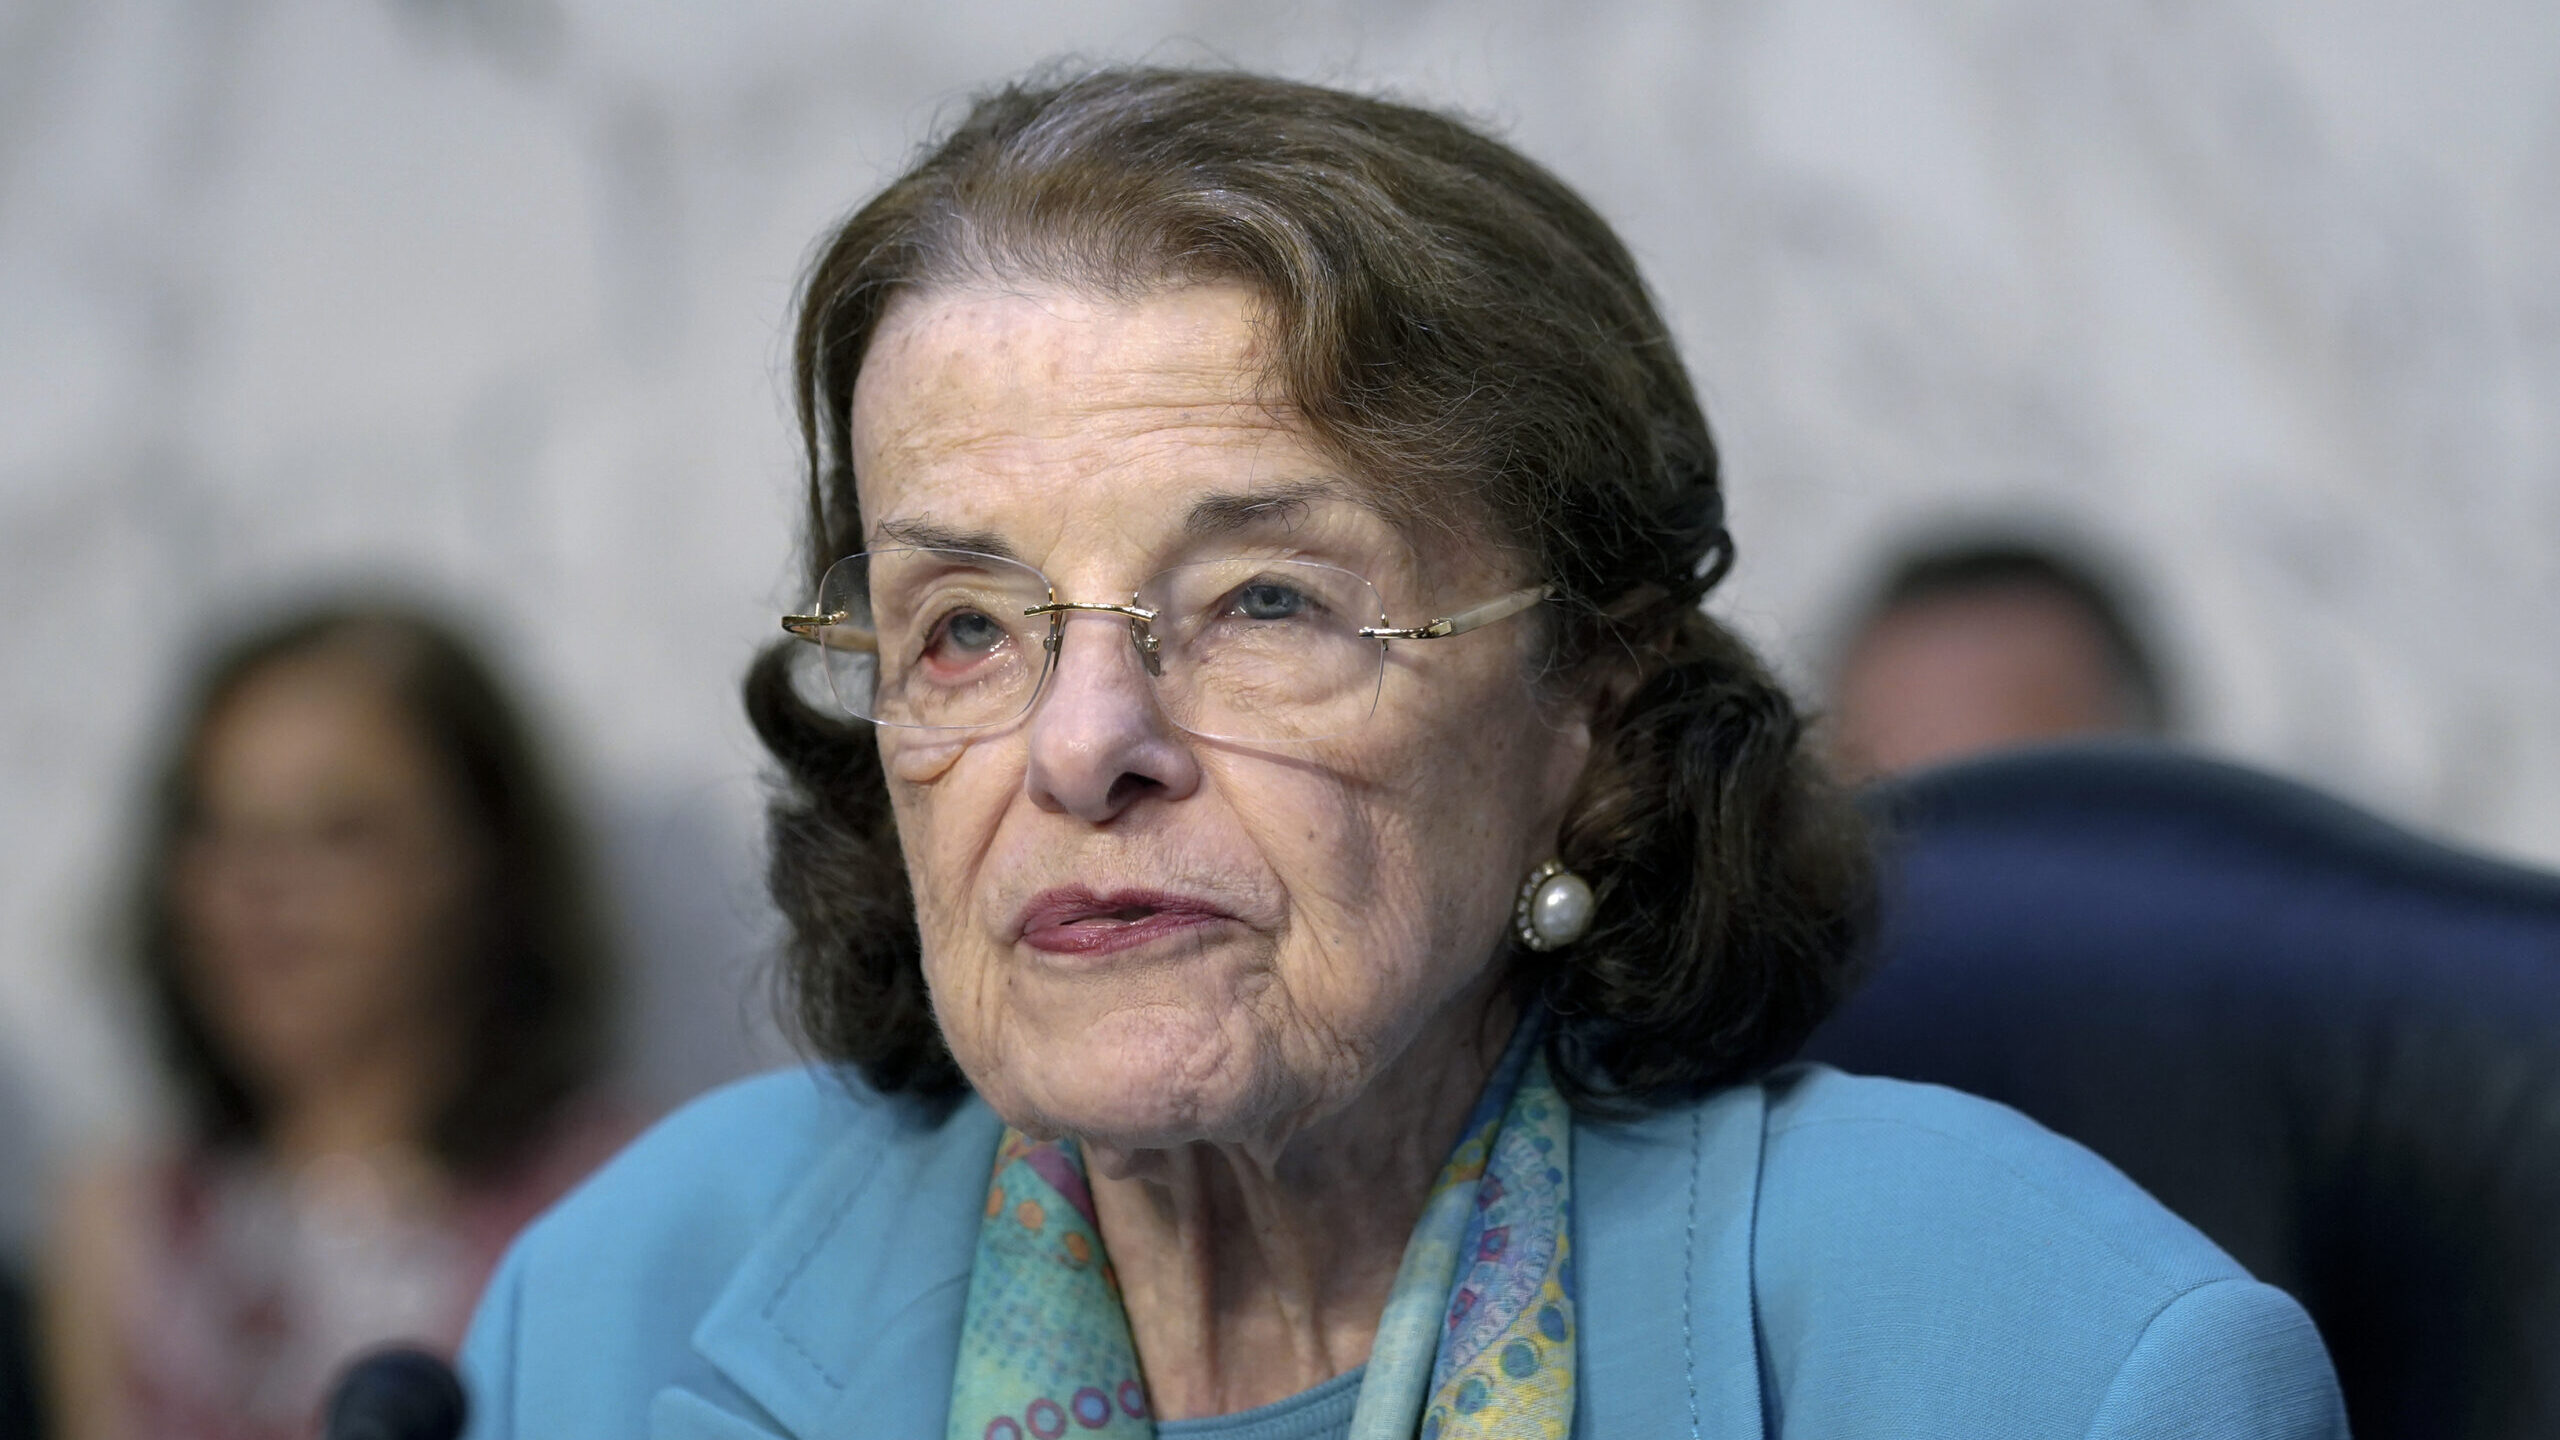 U.S. Sen. Dianne Feinstein of California, who was elected to the Senate in 1992 and broke gender ba...